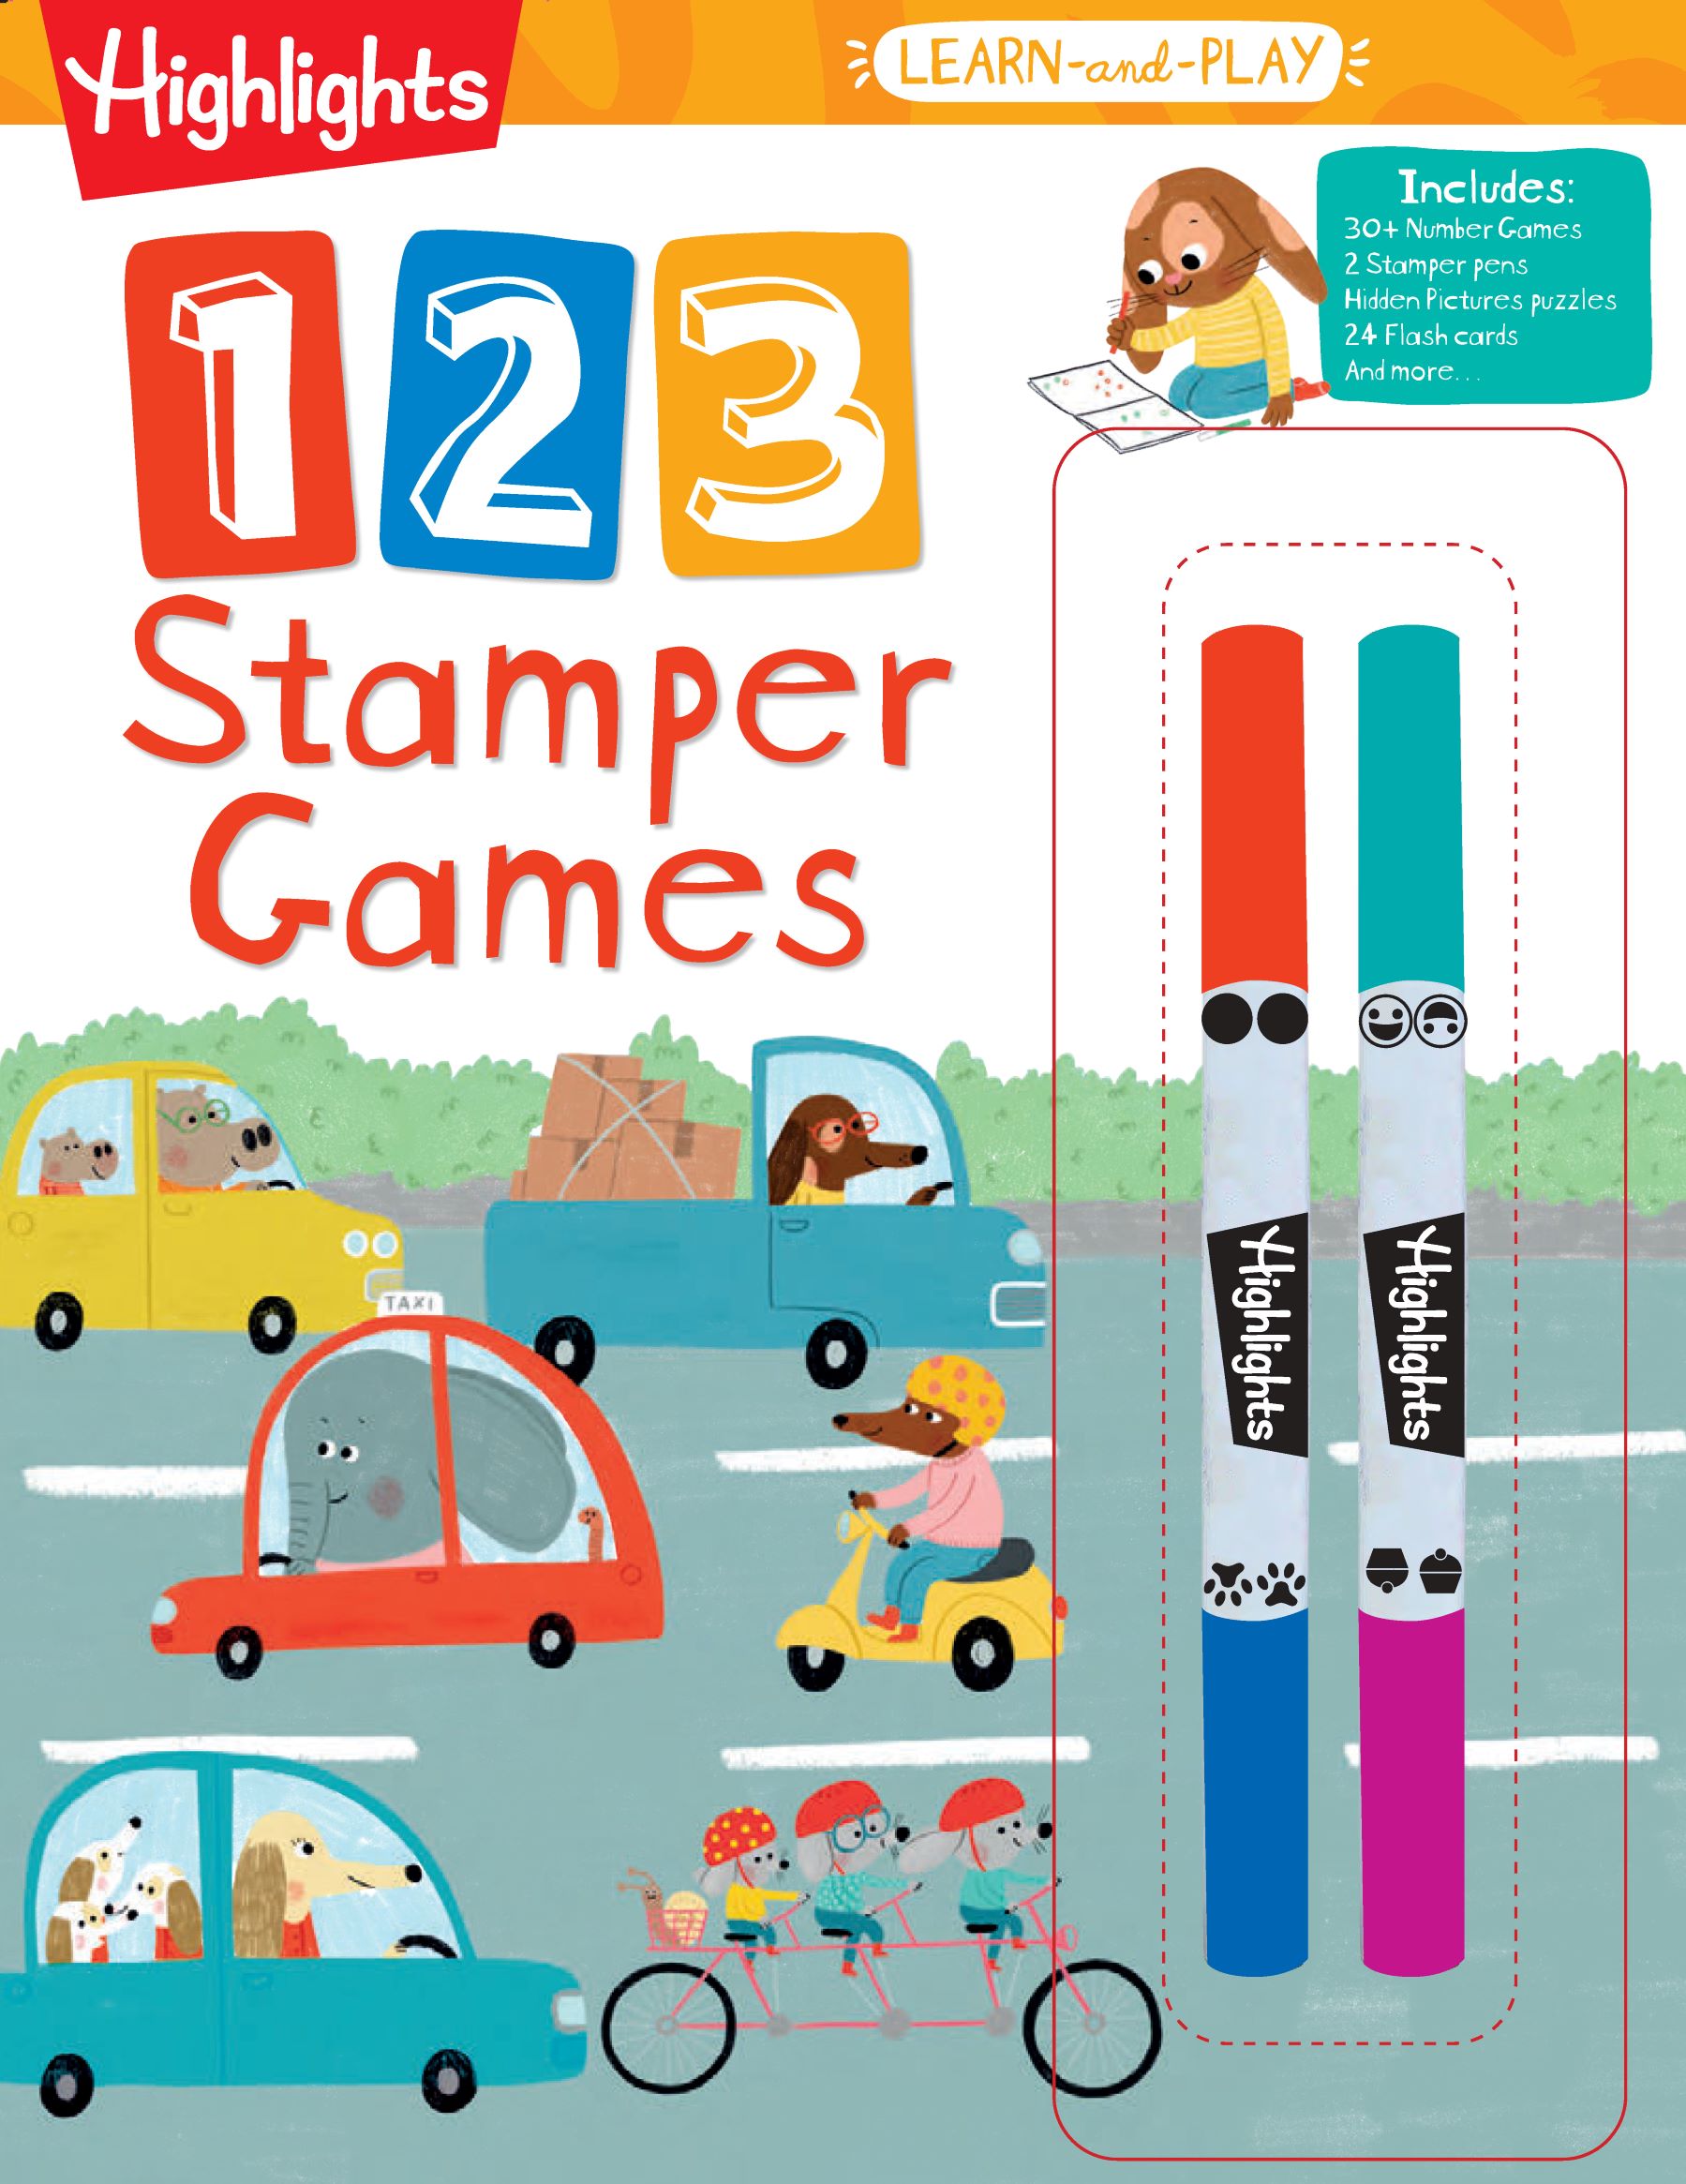 Highlights Learn-and-Play 123 Stamper Games